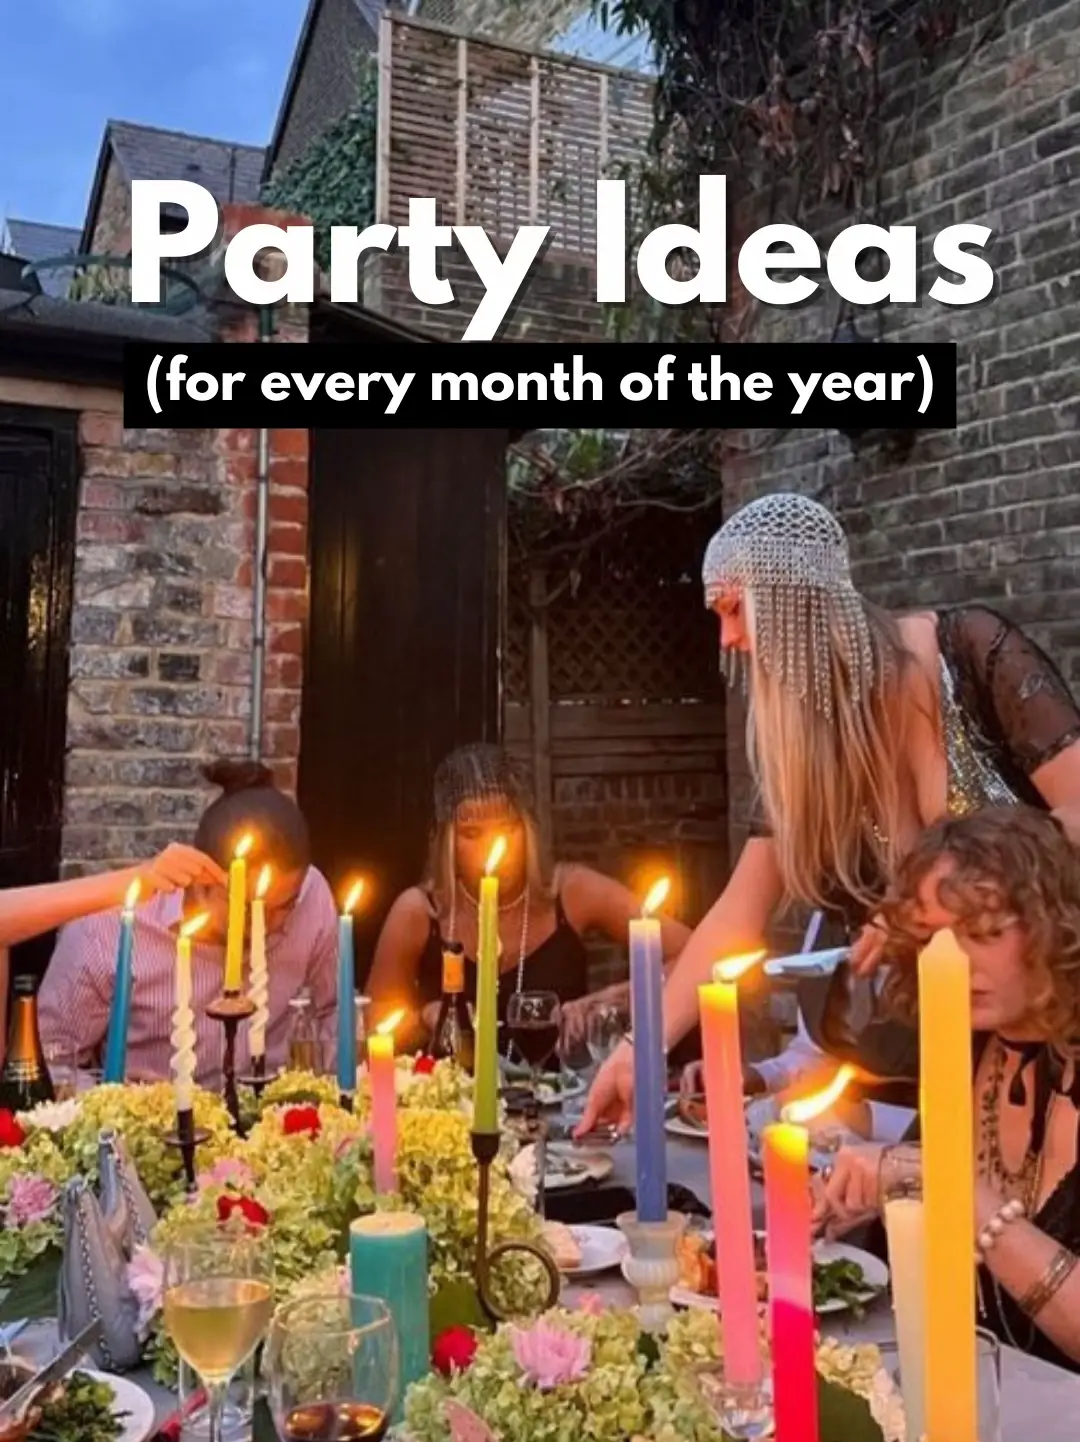 How to Host The Perfect Bonfire Night Party - Lemon8 Search